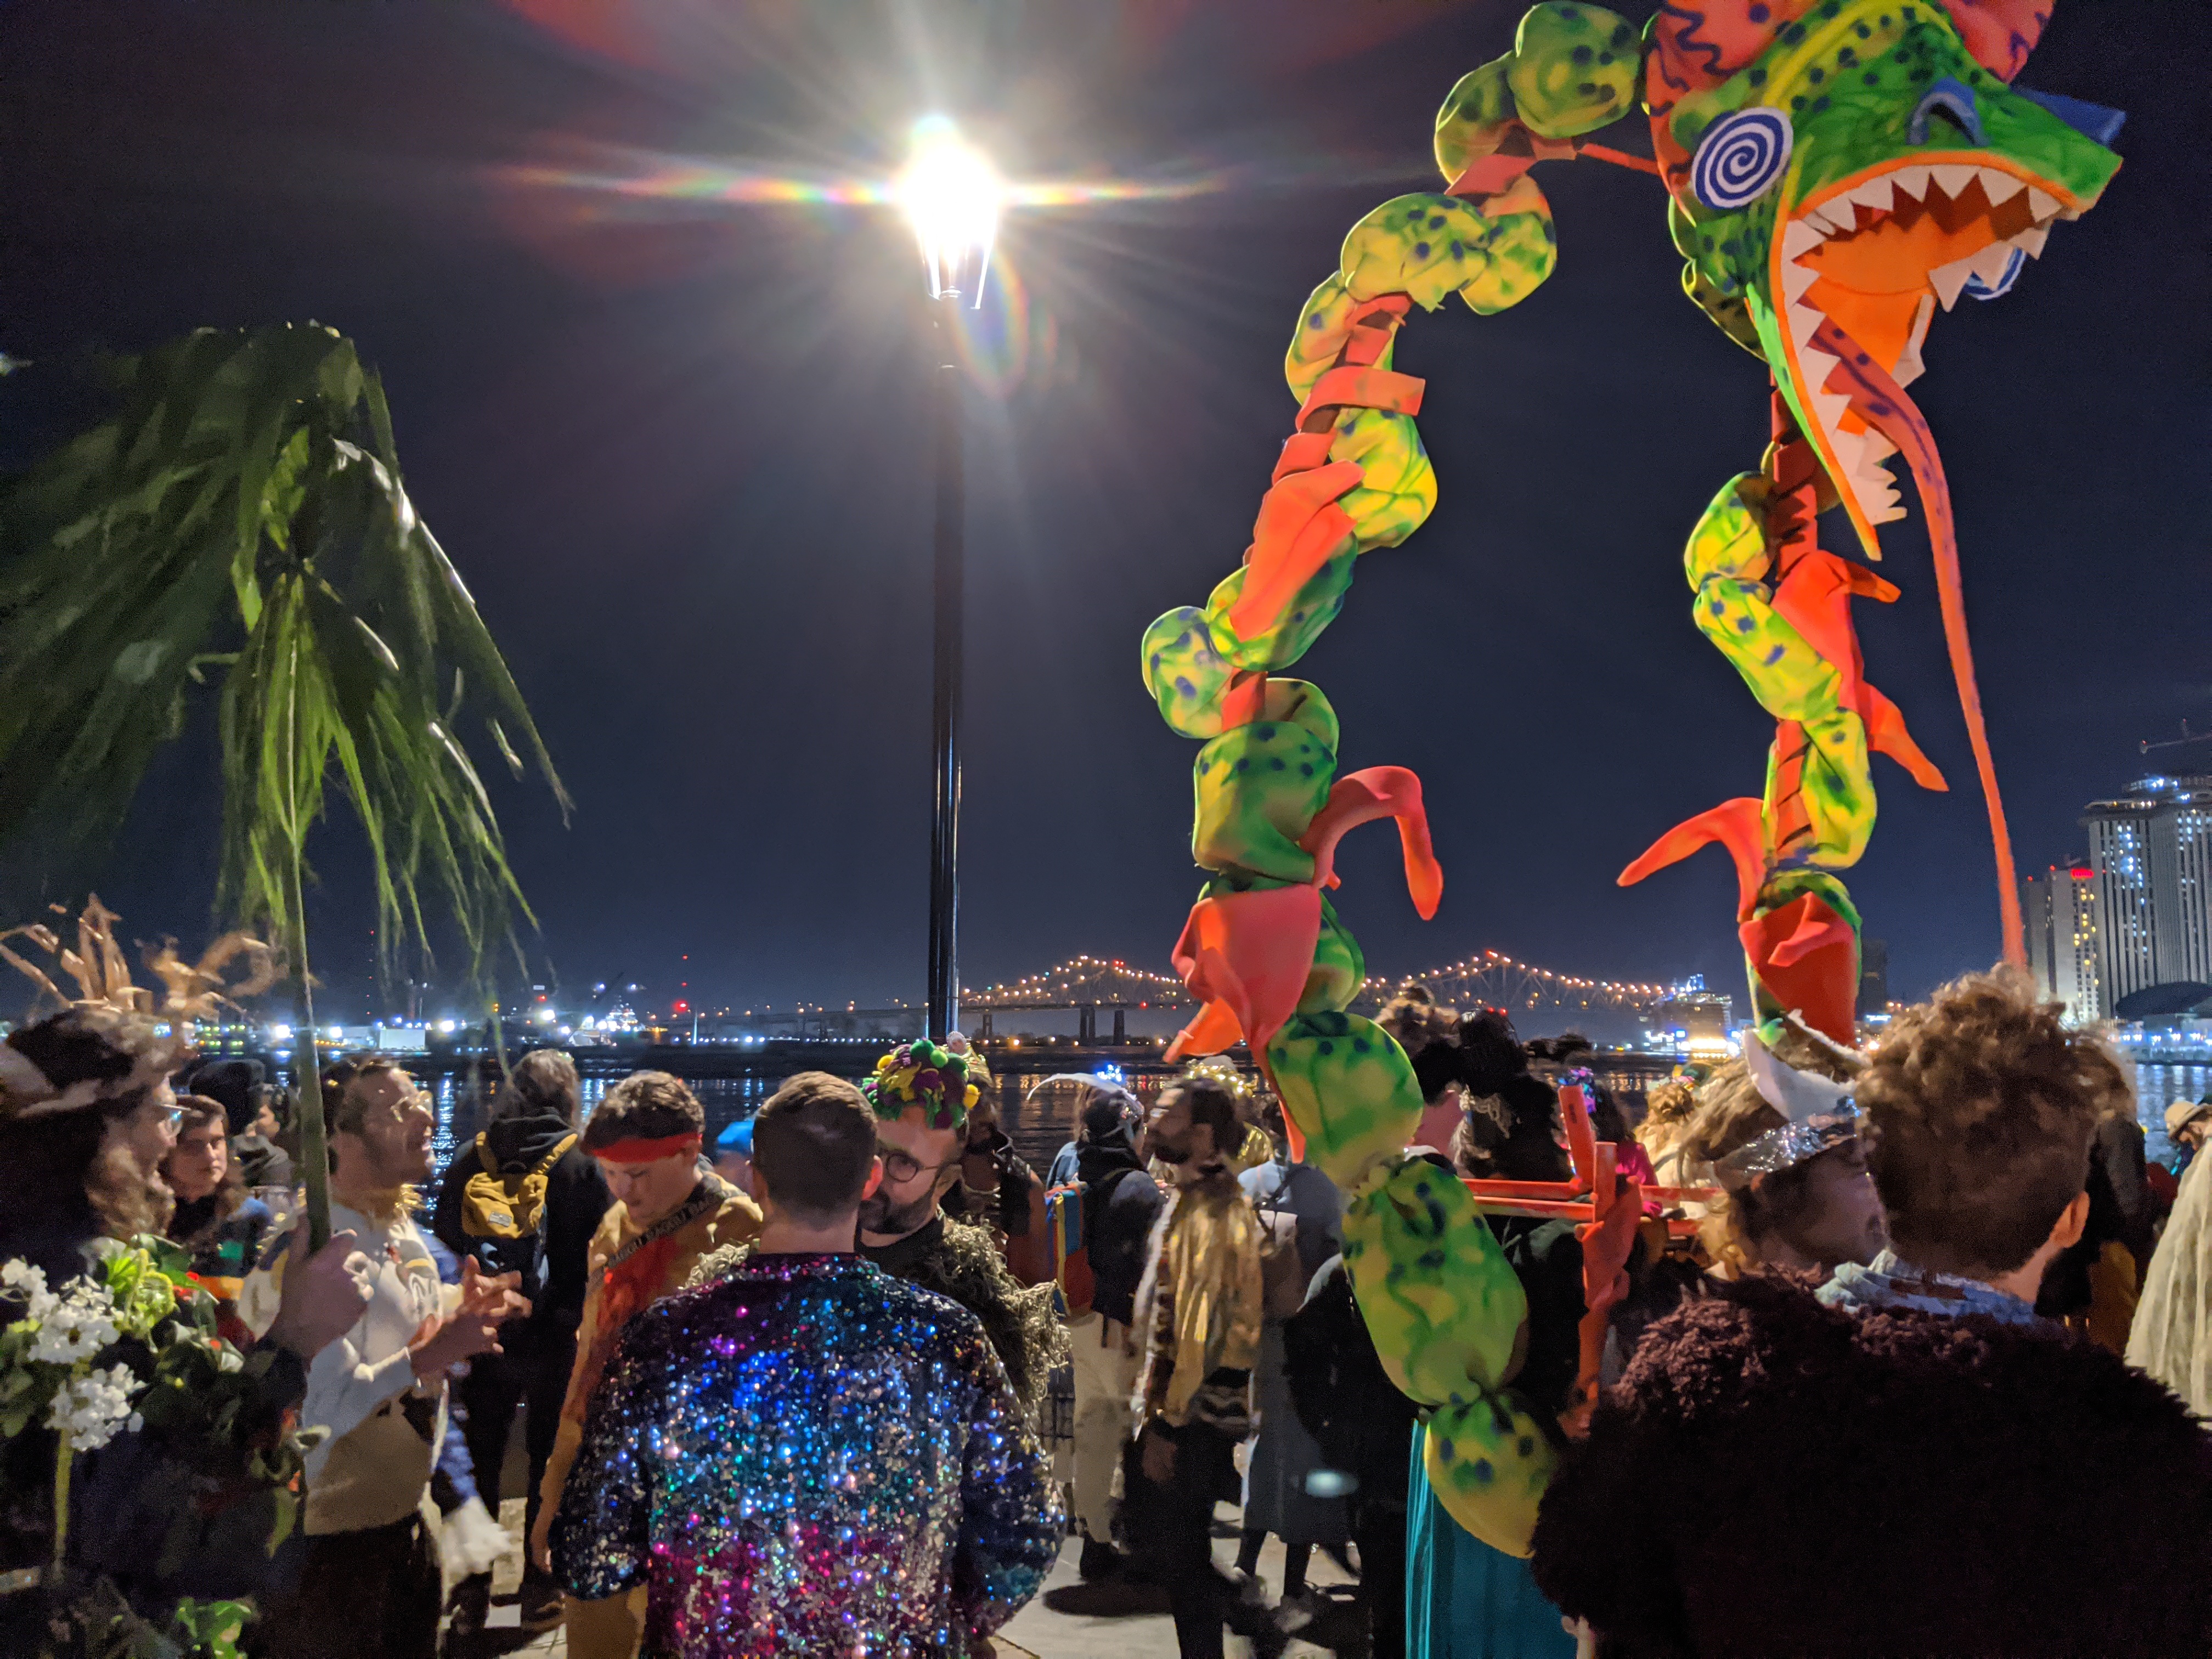 Travel Blog - Locals dressed up in various colourful costumes and partying on the harbour on Fat Tuesday for the end of Mardi Gras in New Orleans - NOLA 